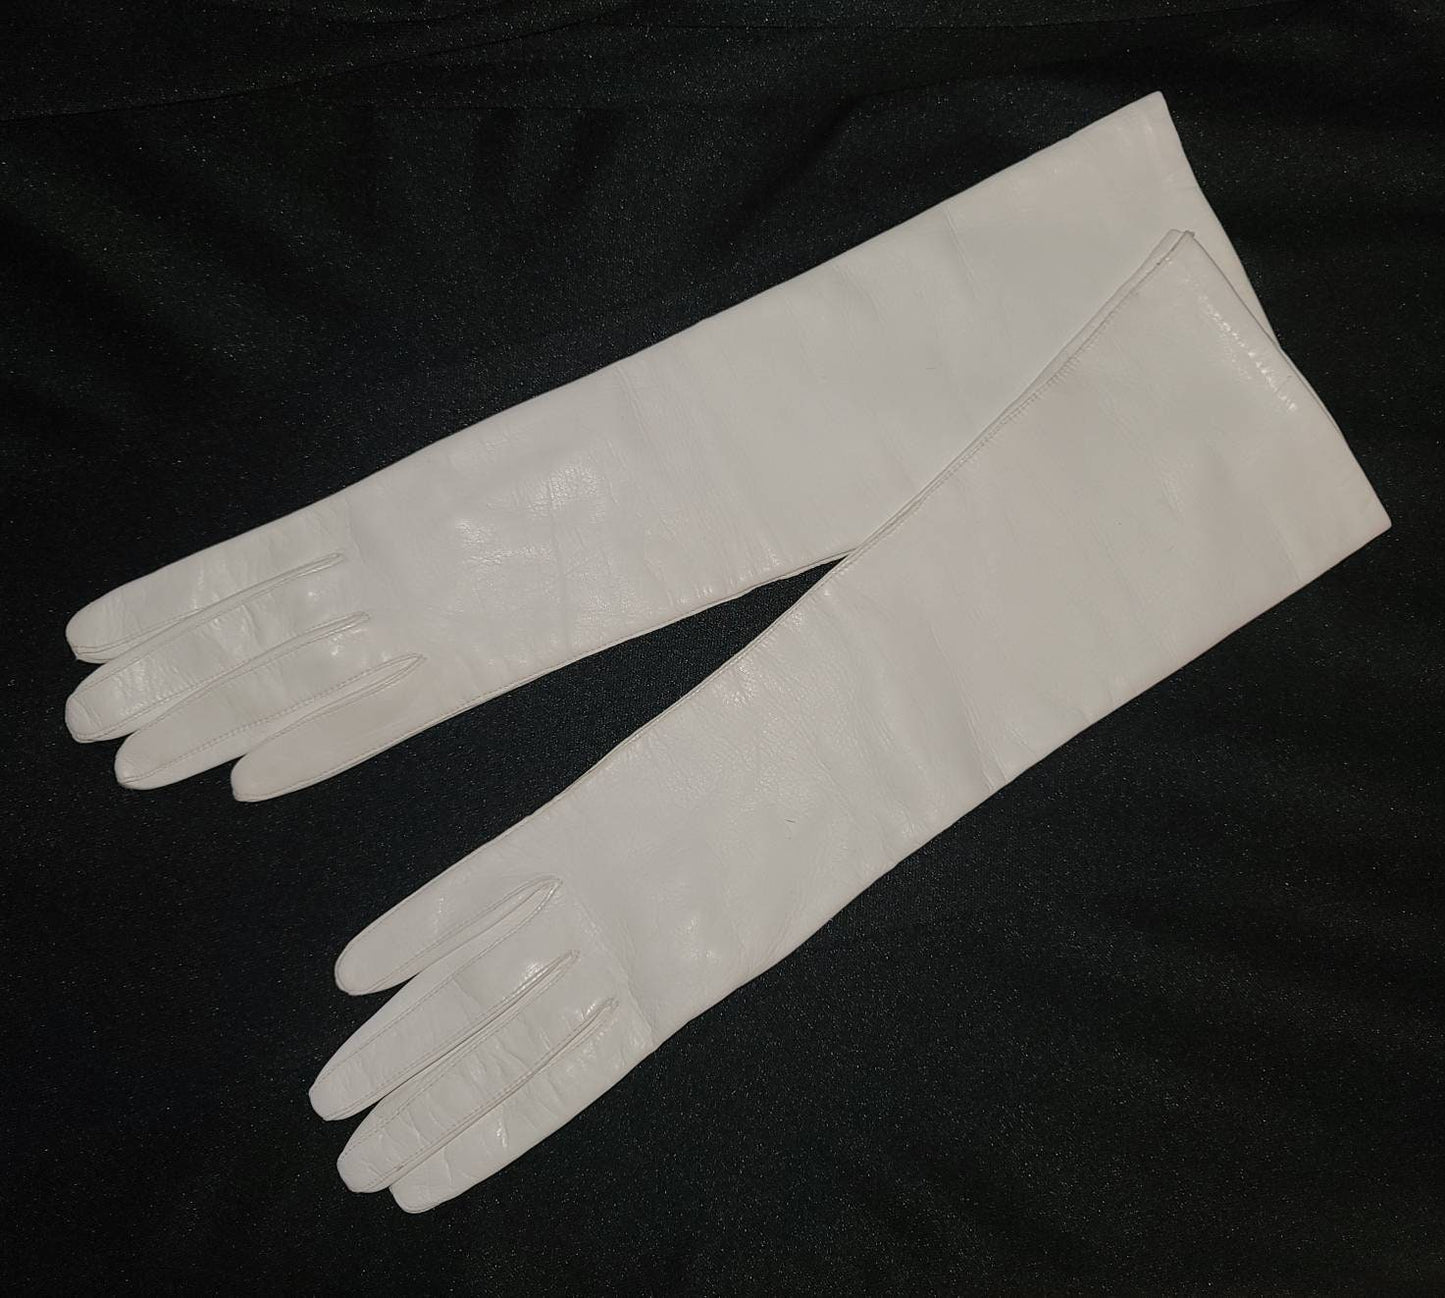 Vintage Leather Gloves 1950s 60s Elbow Length Cream White Kid Leather Gloves Made in Italy Silk Lined Rockabilly Wedding Bridal 6